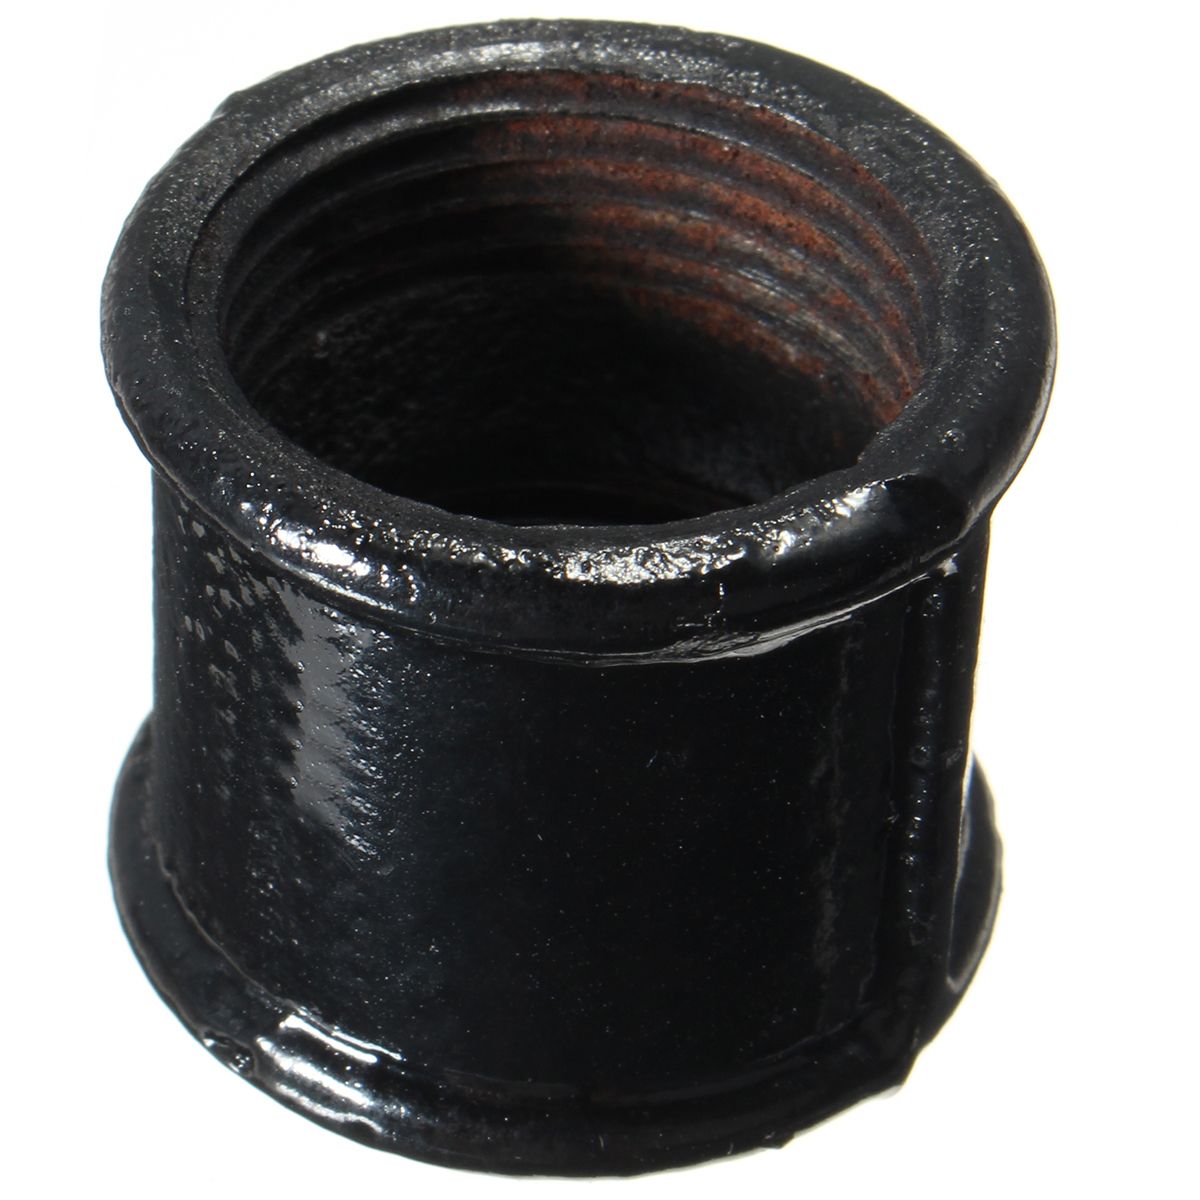 34-Inch-Black-Iron-Pipe-Threaded-Coupling-Fittings-Malleable-Cast-Iron-1173272